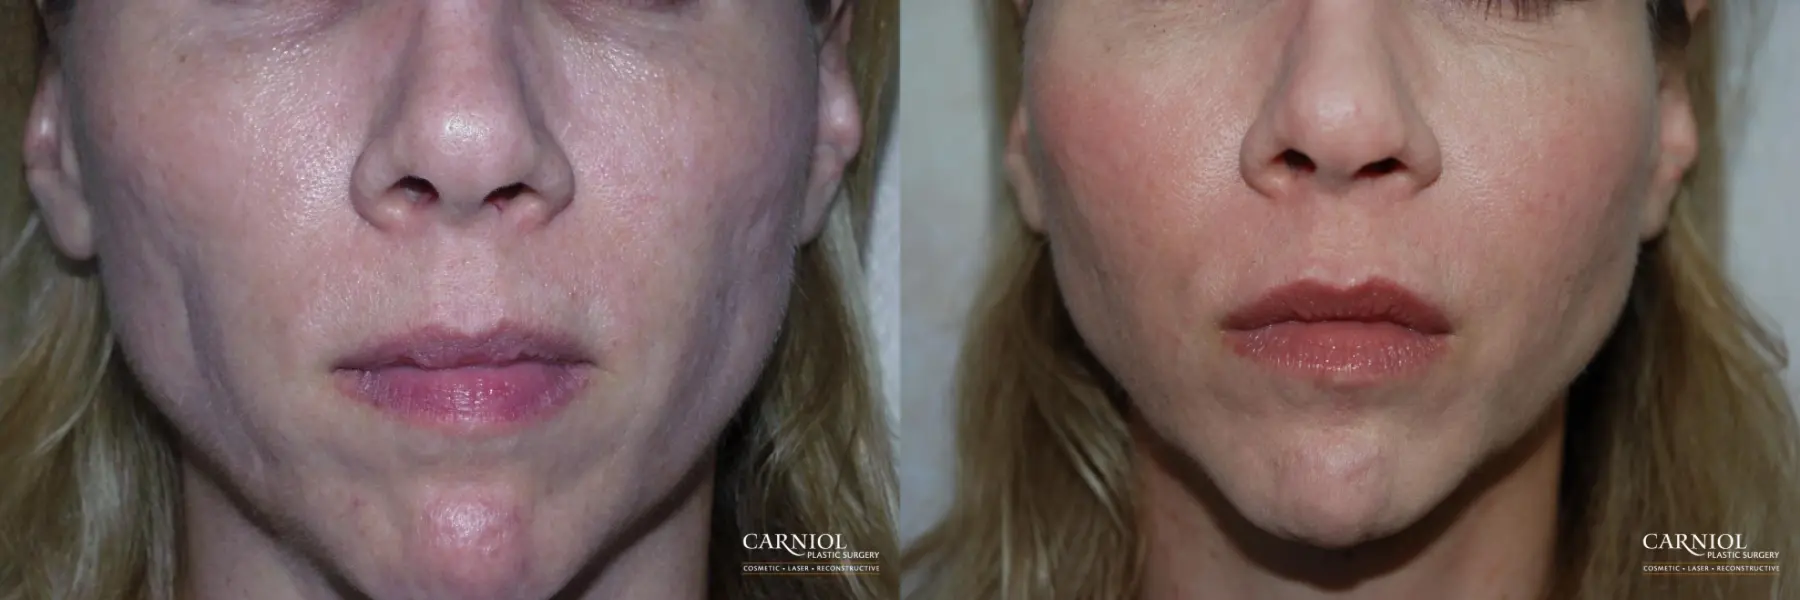 Non-Surgical Facelift: Patient 10 - Before and After 1